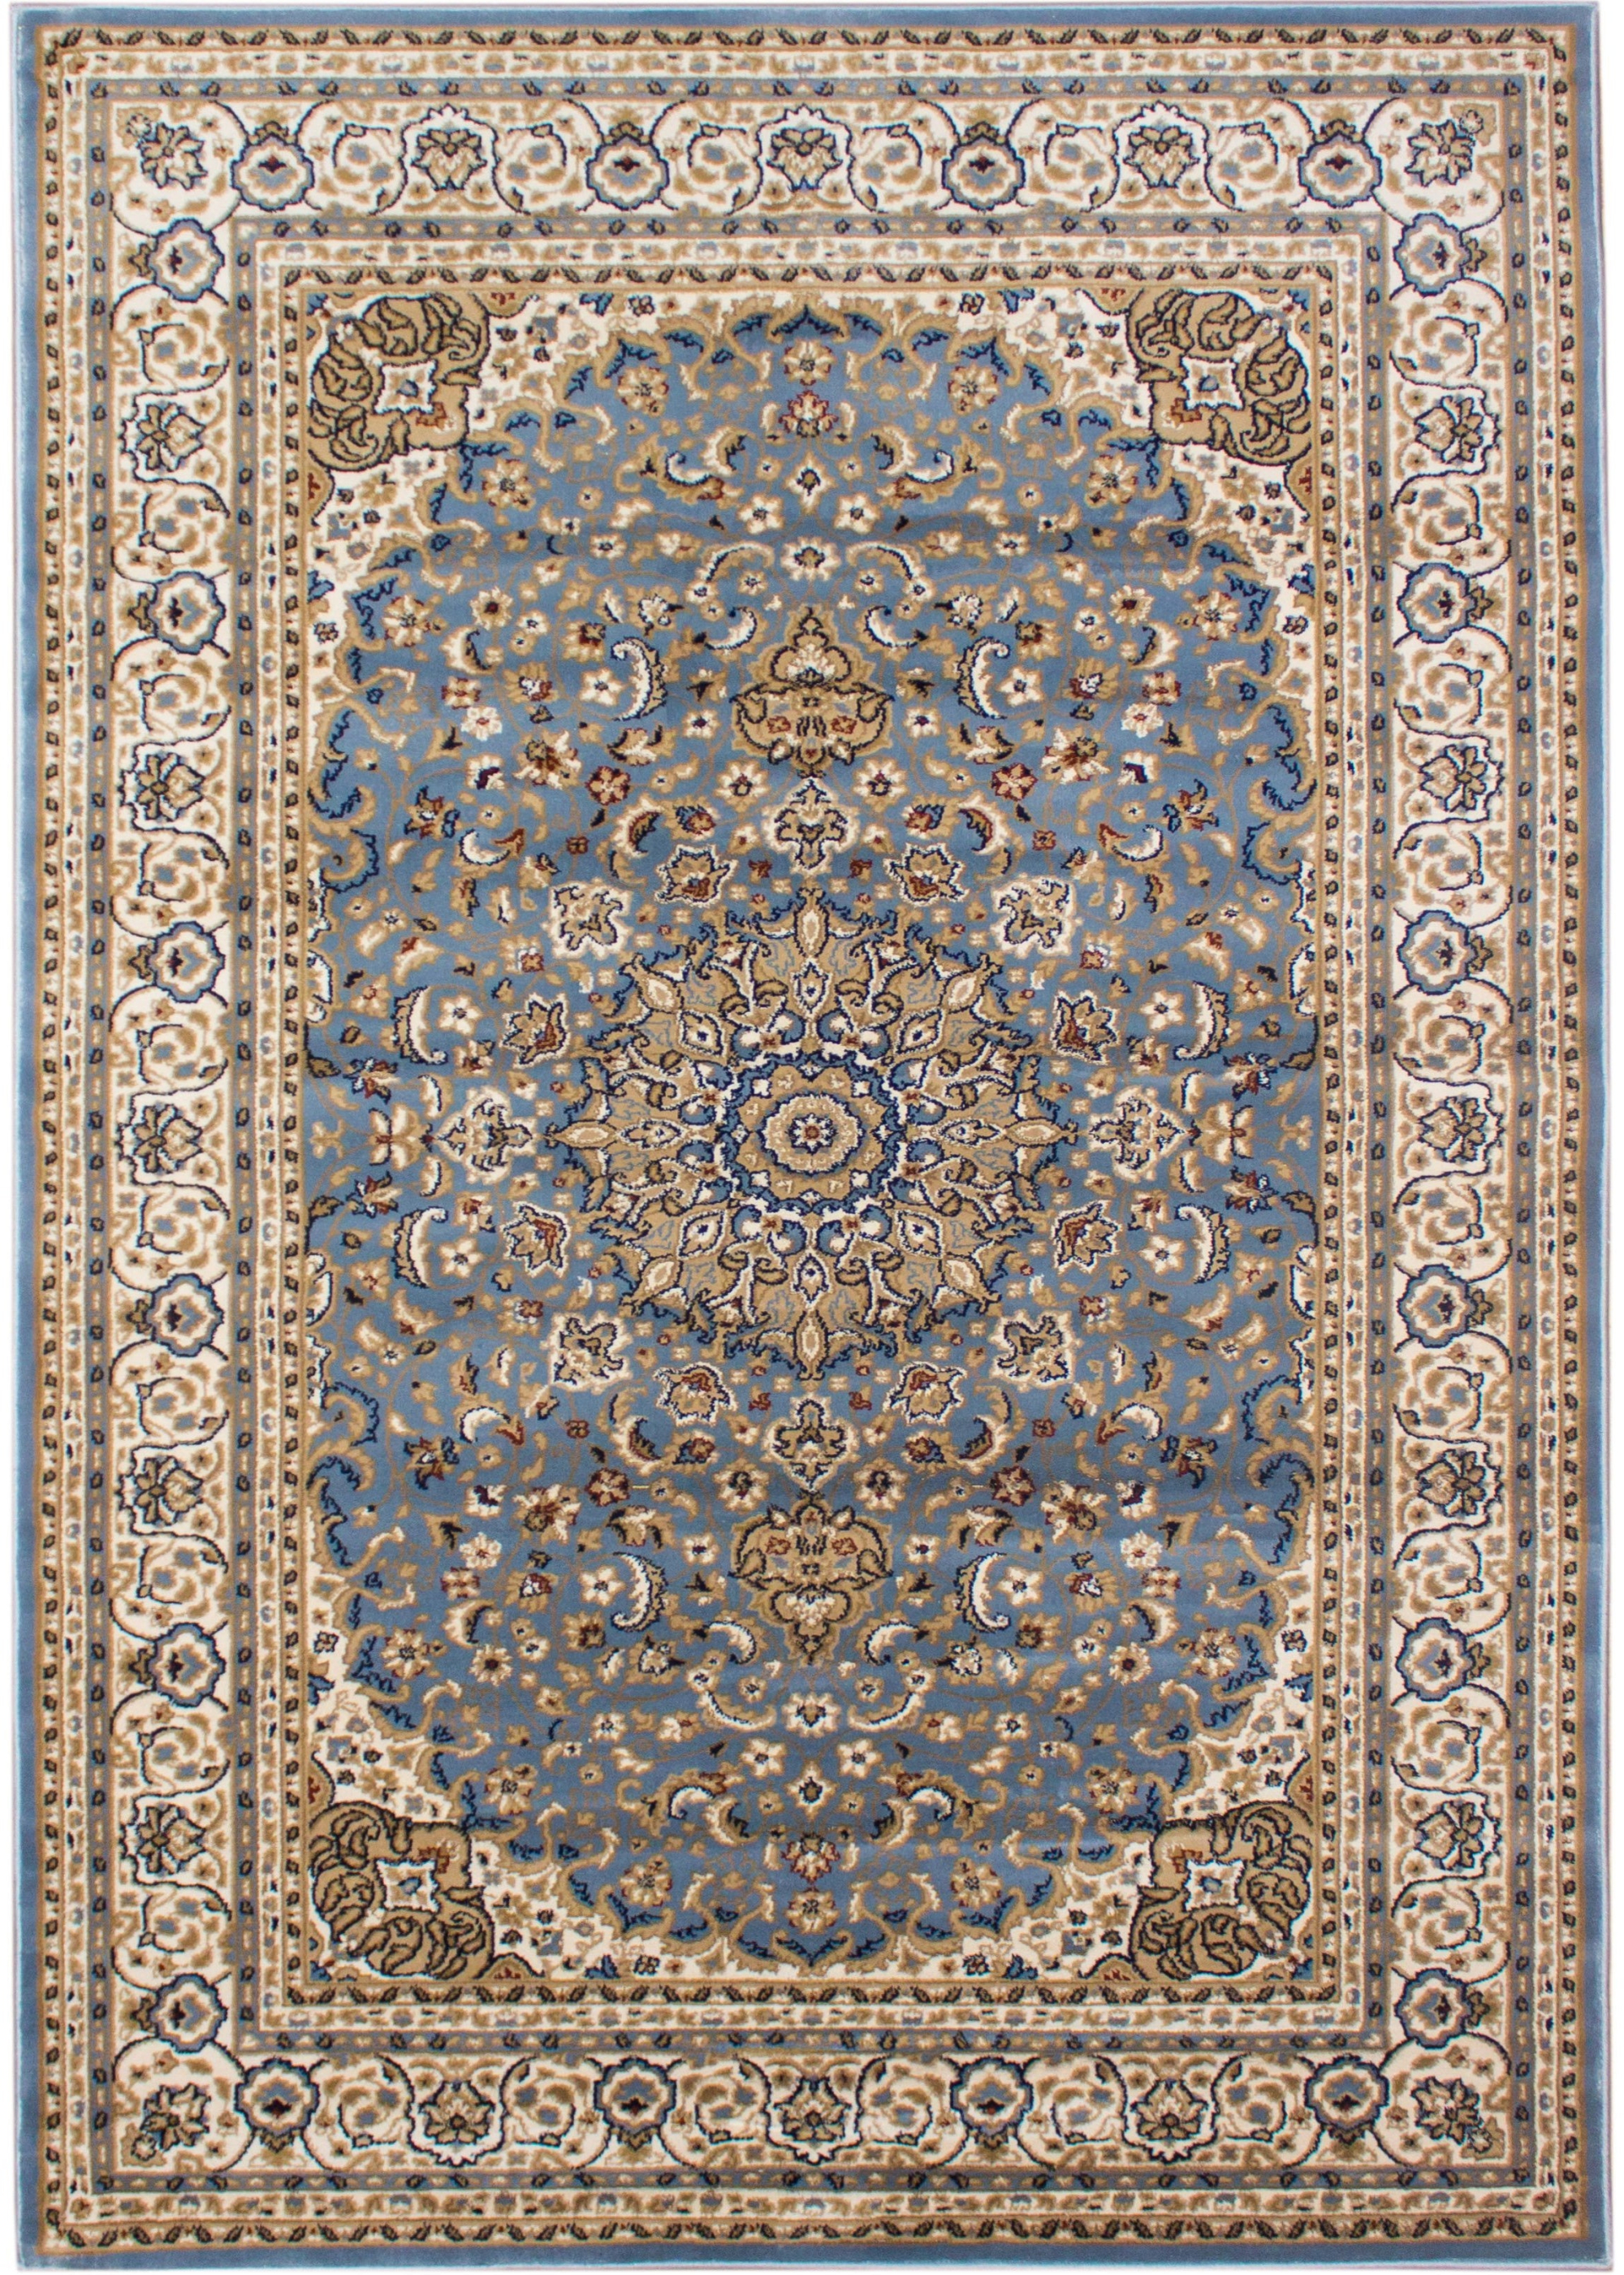 Atlas Woven Rug-Area rug for living room, dining area, and bedroom